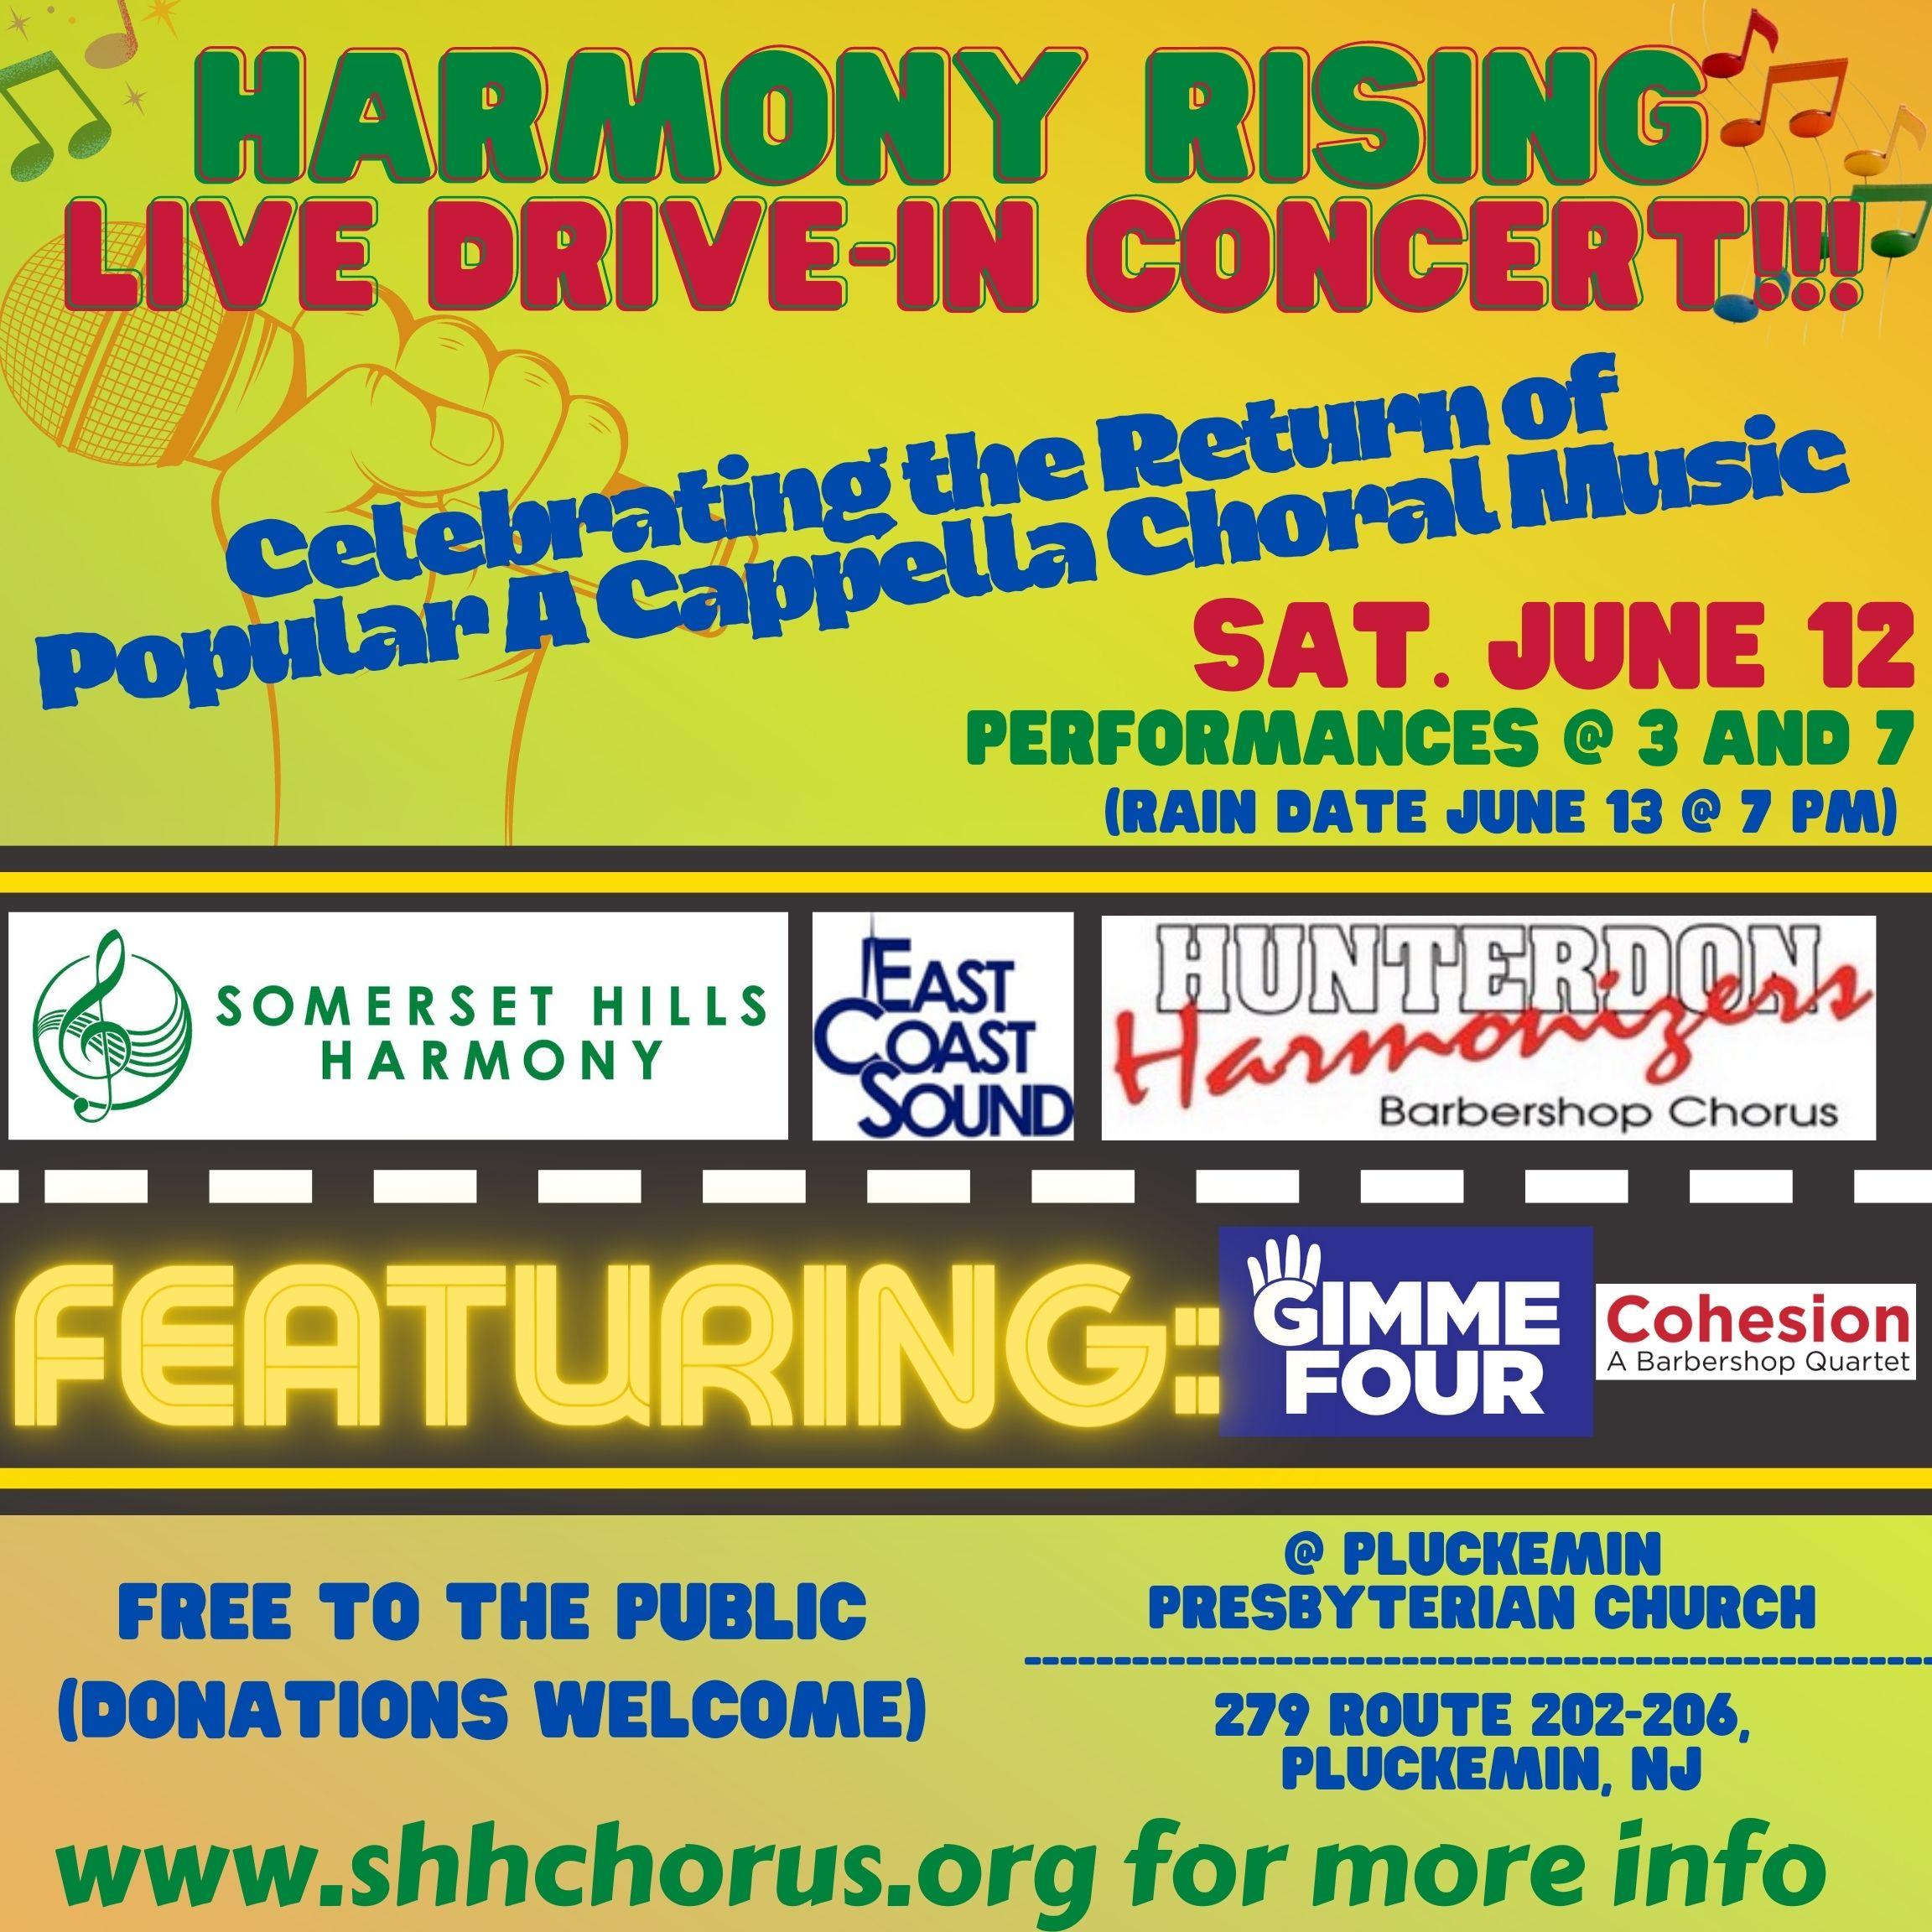 SHH Presents: "Harmony Rising" Live Drive-In Concert